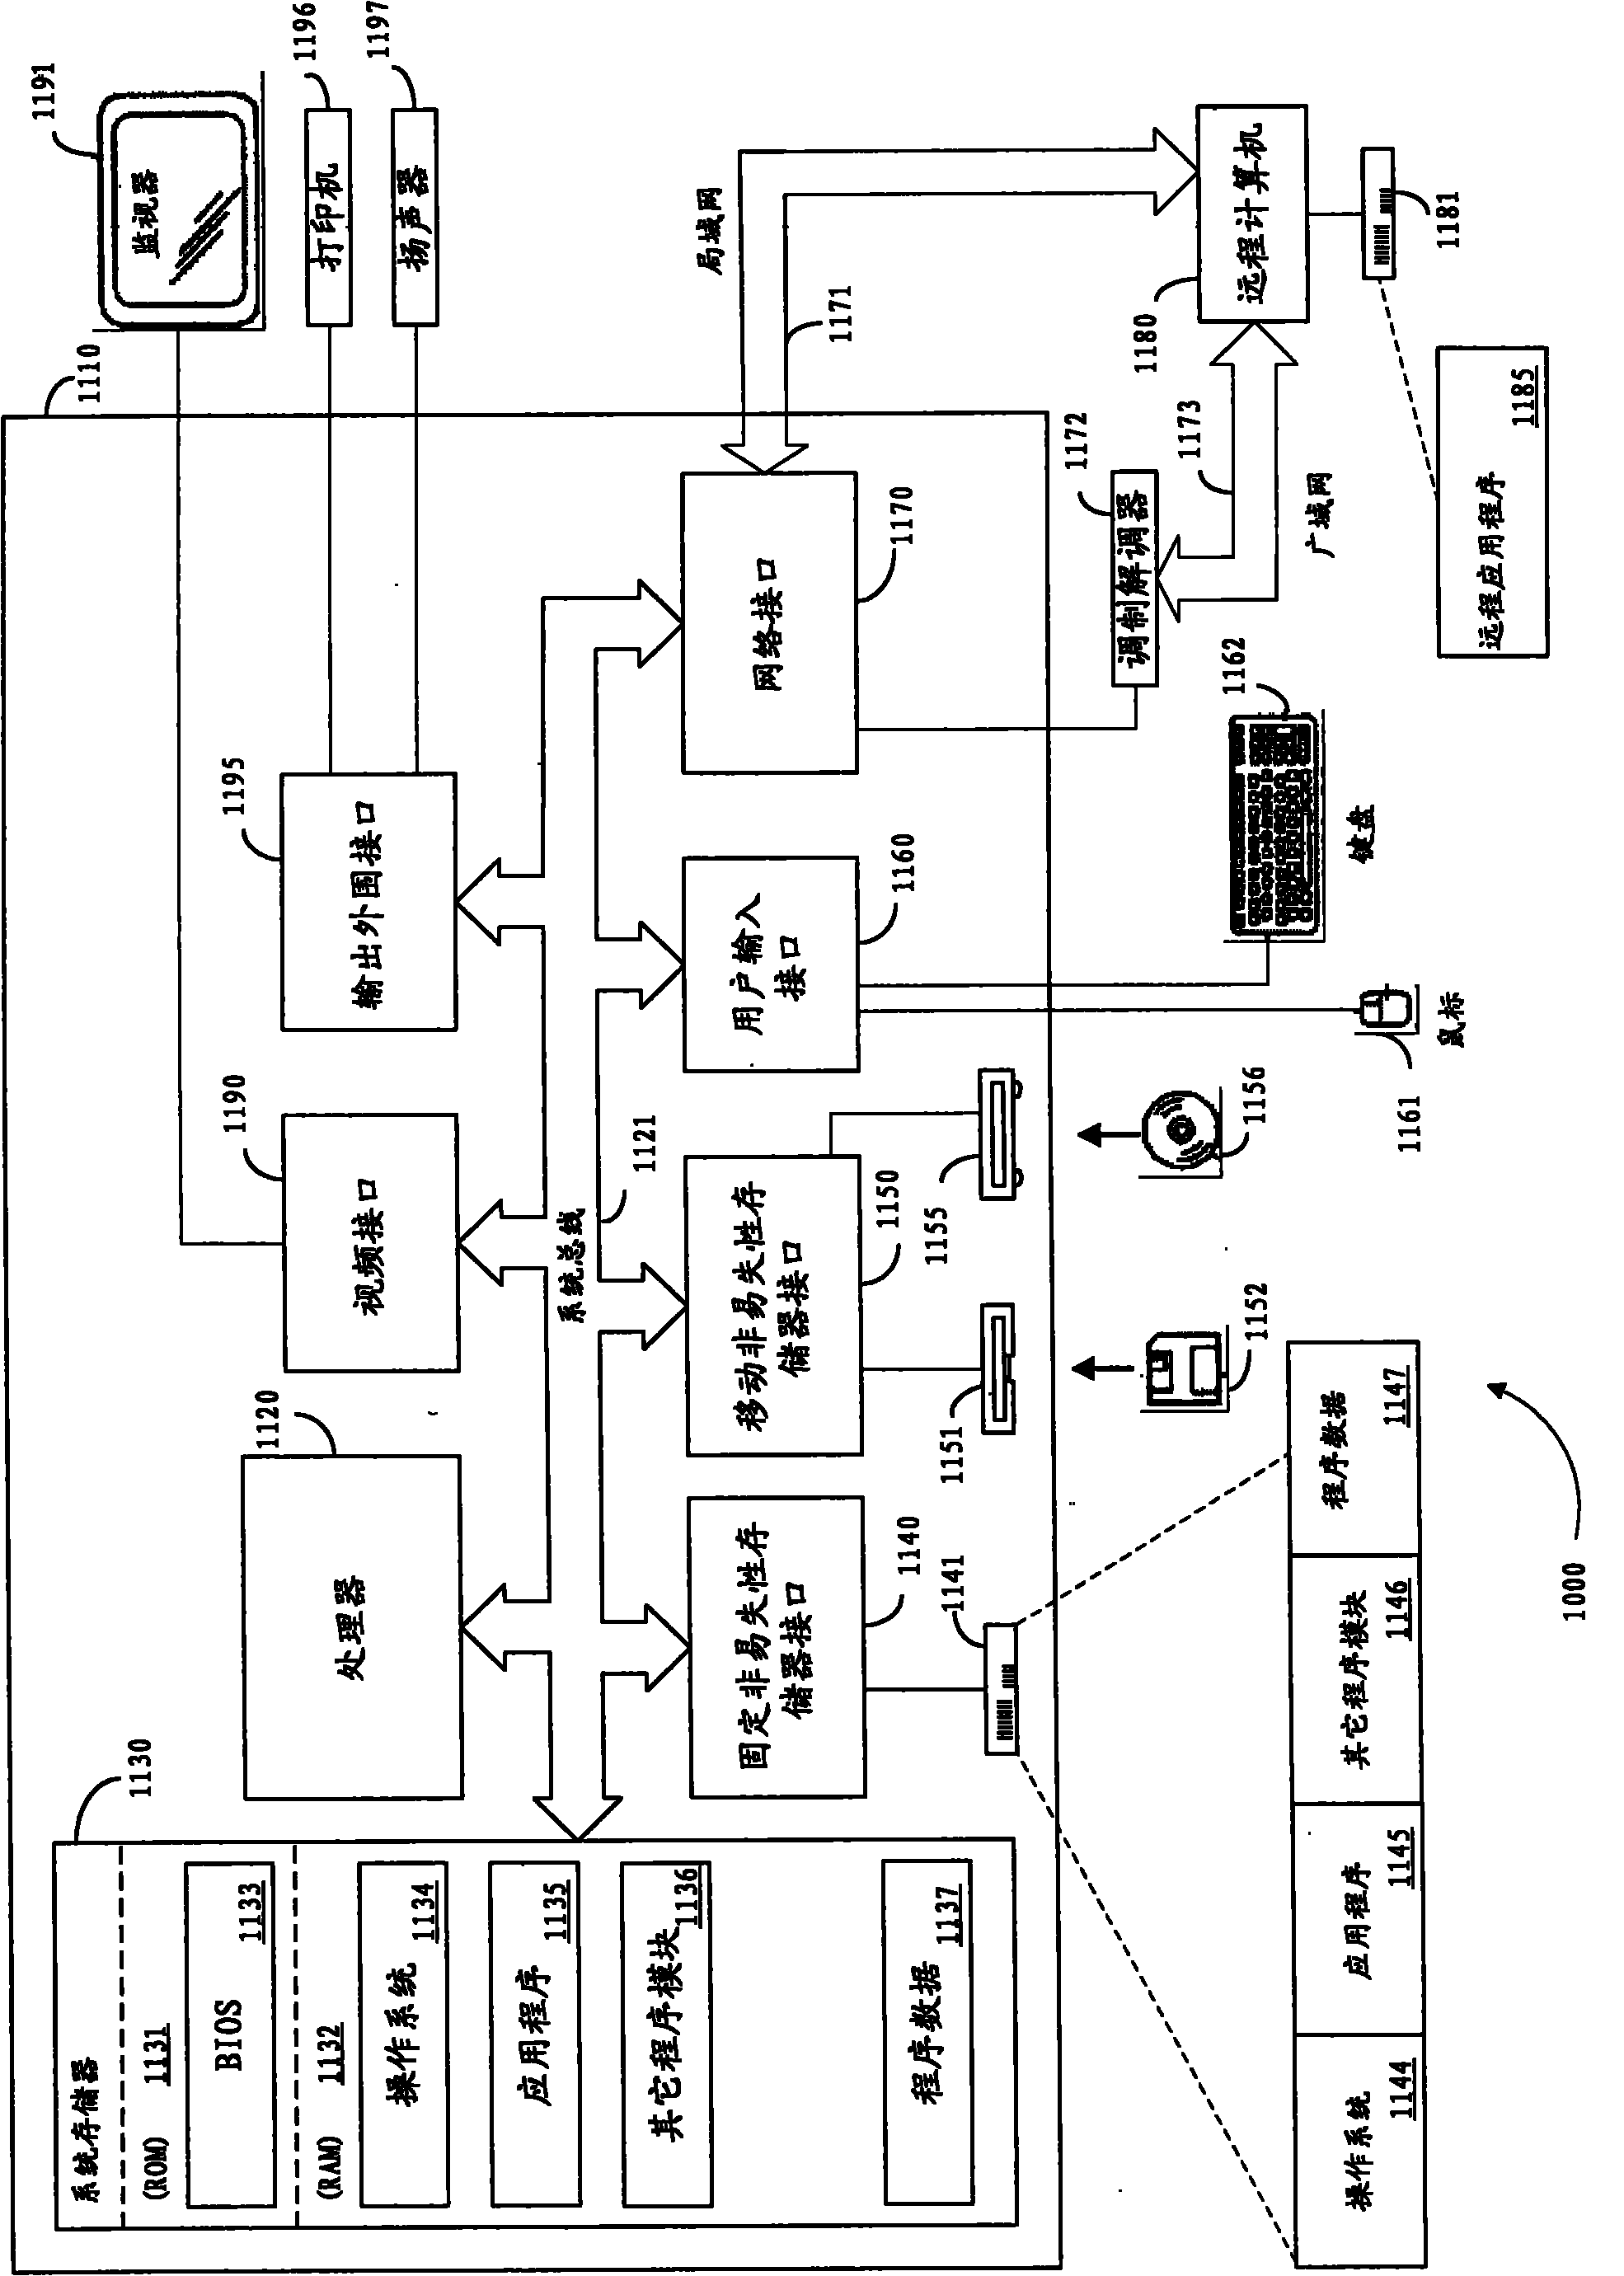 Command decoding device and method for disordered coded commands